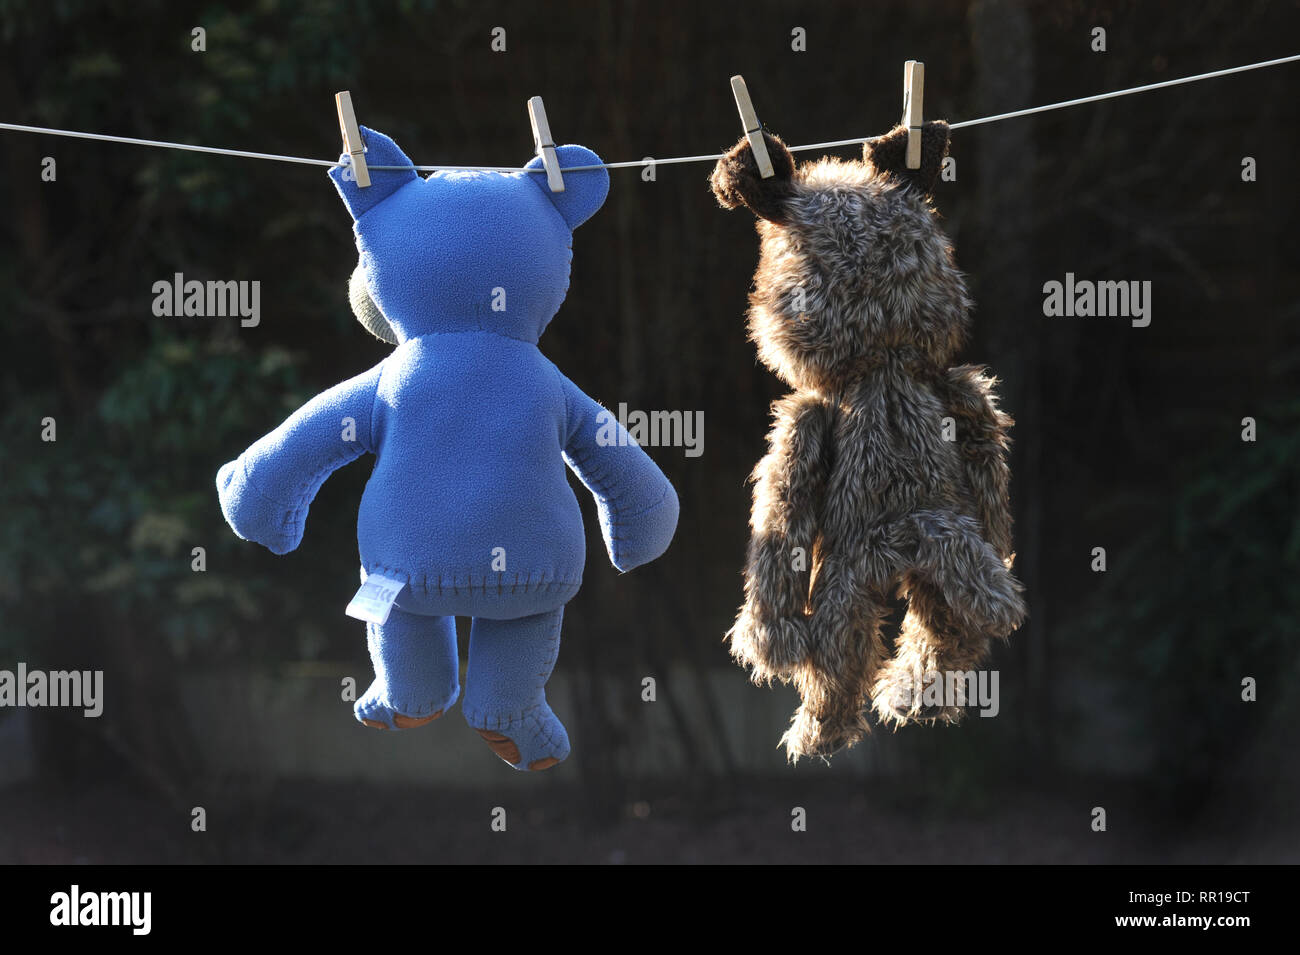 CHILDRENS SOFT TOYS DRYING ON HOME WASHING LINE RE CLEANING HANGING OUT ETC UK Stock Photo